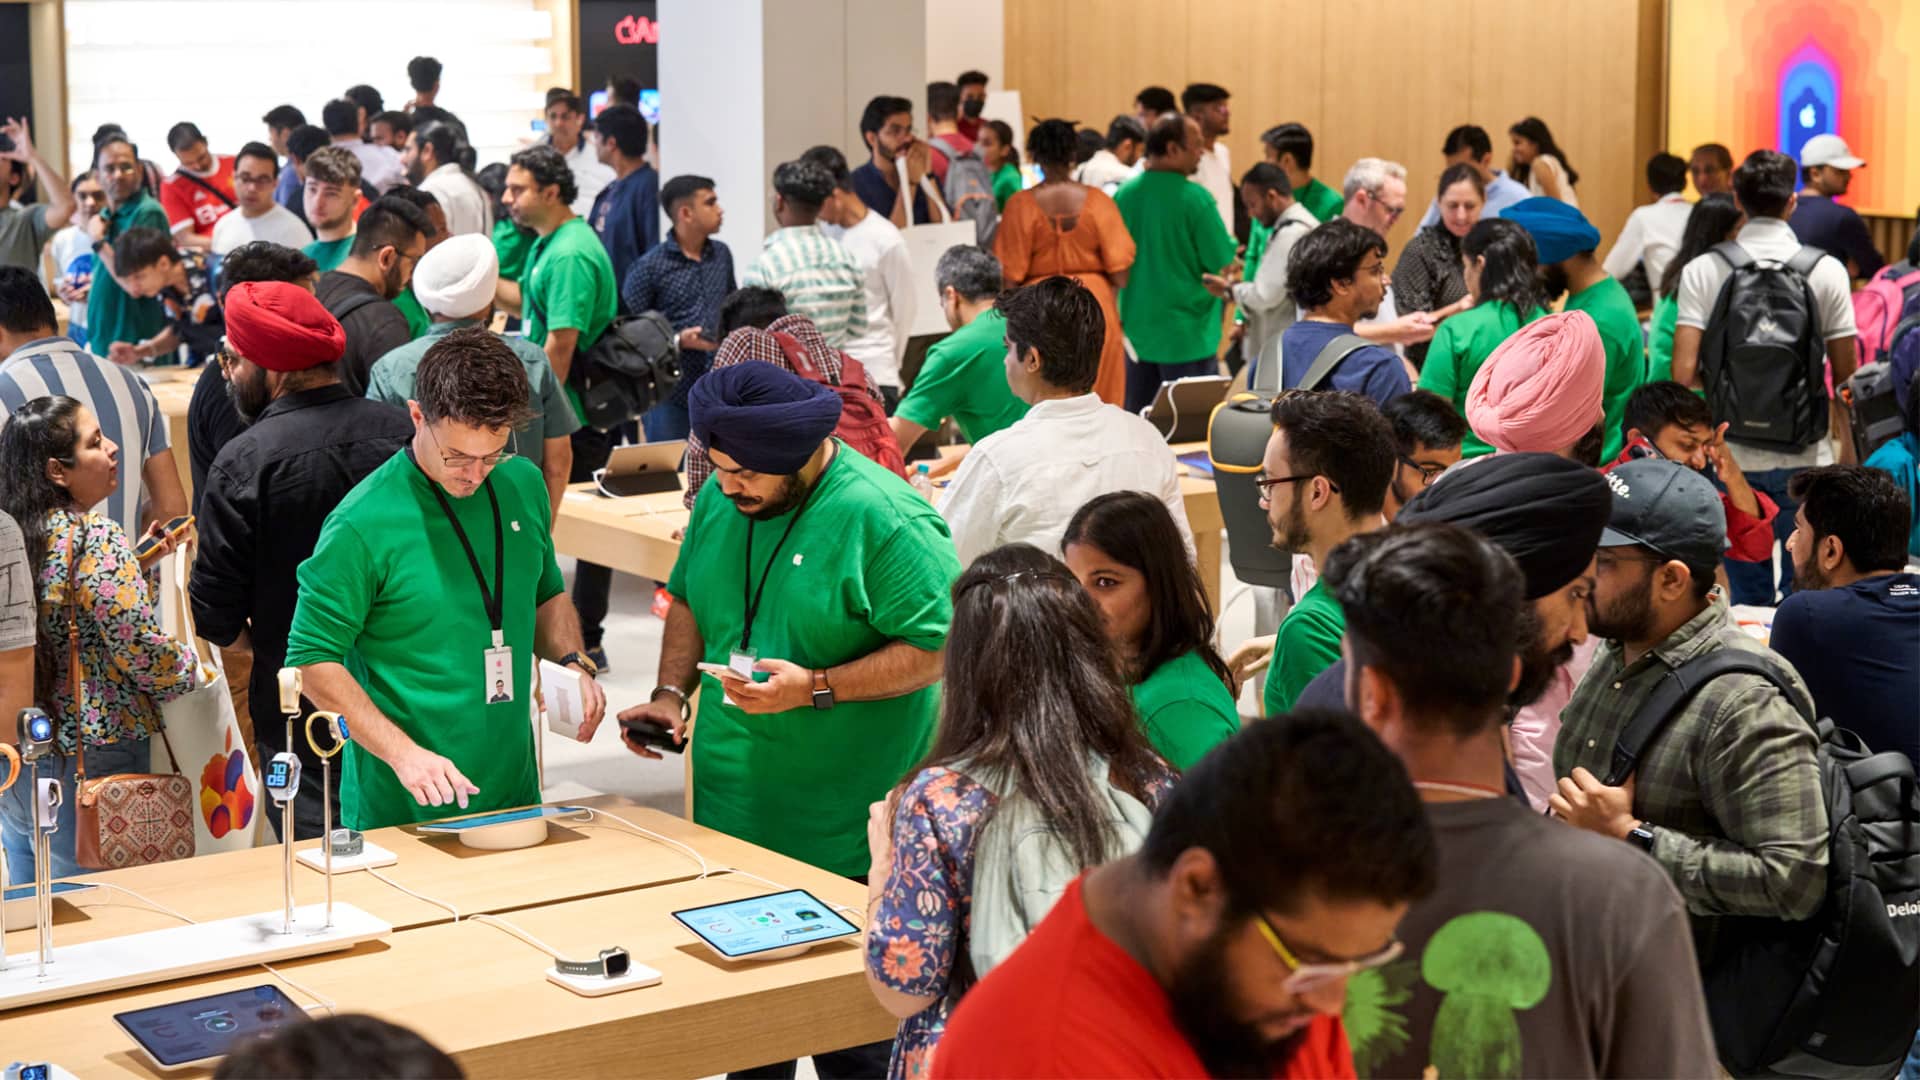 Some Apple stores earning $100+ million yearly, with 50 new ones planned